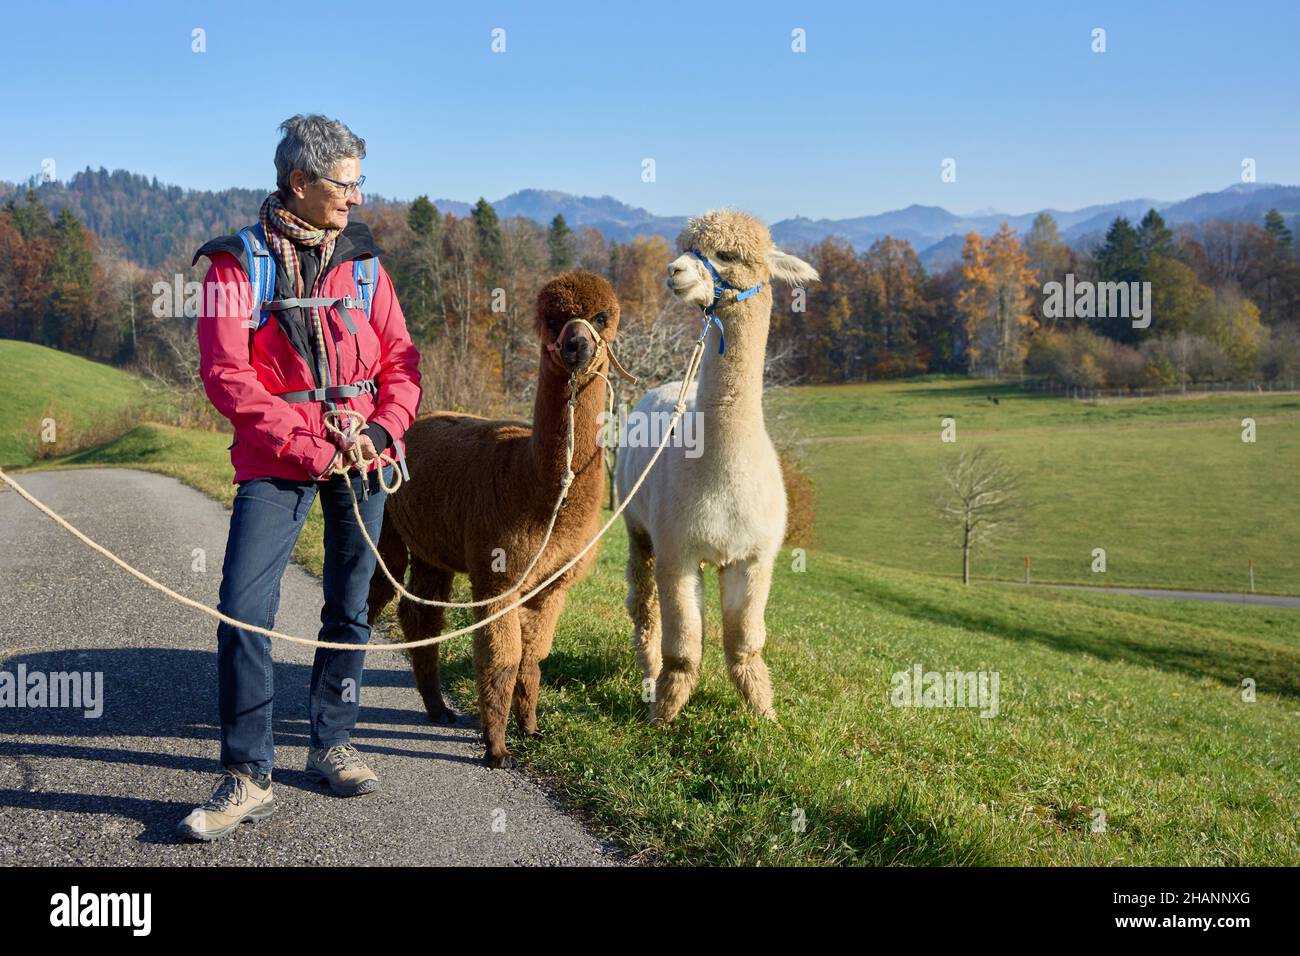 Woman In Red Jacket Walks Two Alpacas, Beige And Brown. In The Background Meadows, Forest, Blue Sky. Bauma, Zurich Oberland, Switzerland Stock Photo